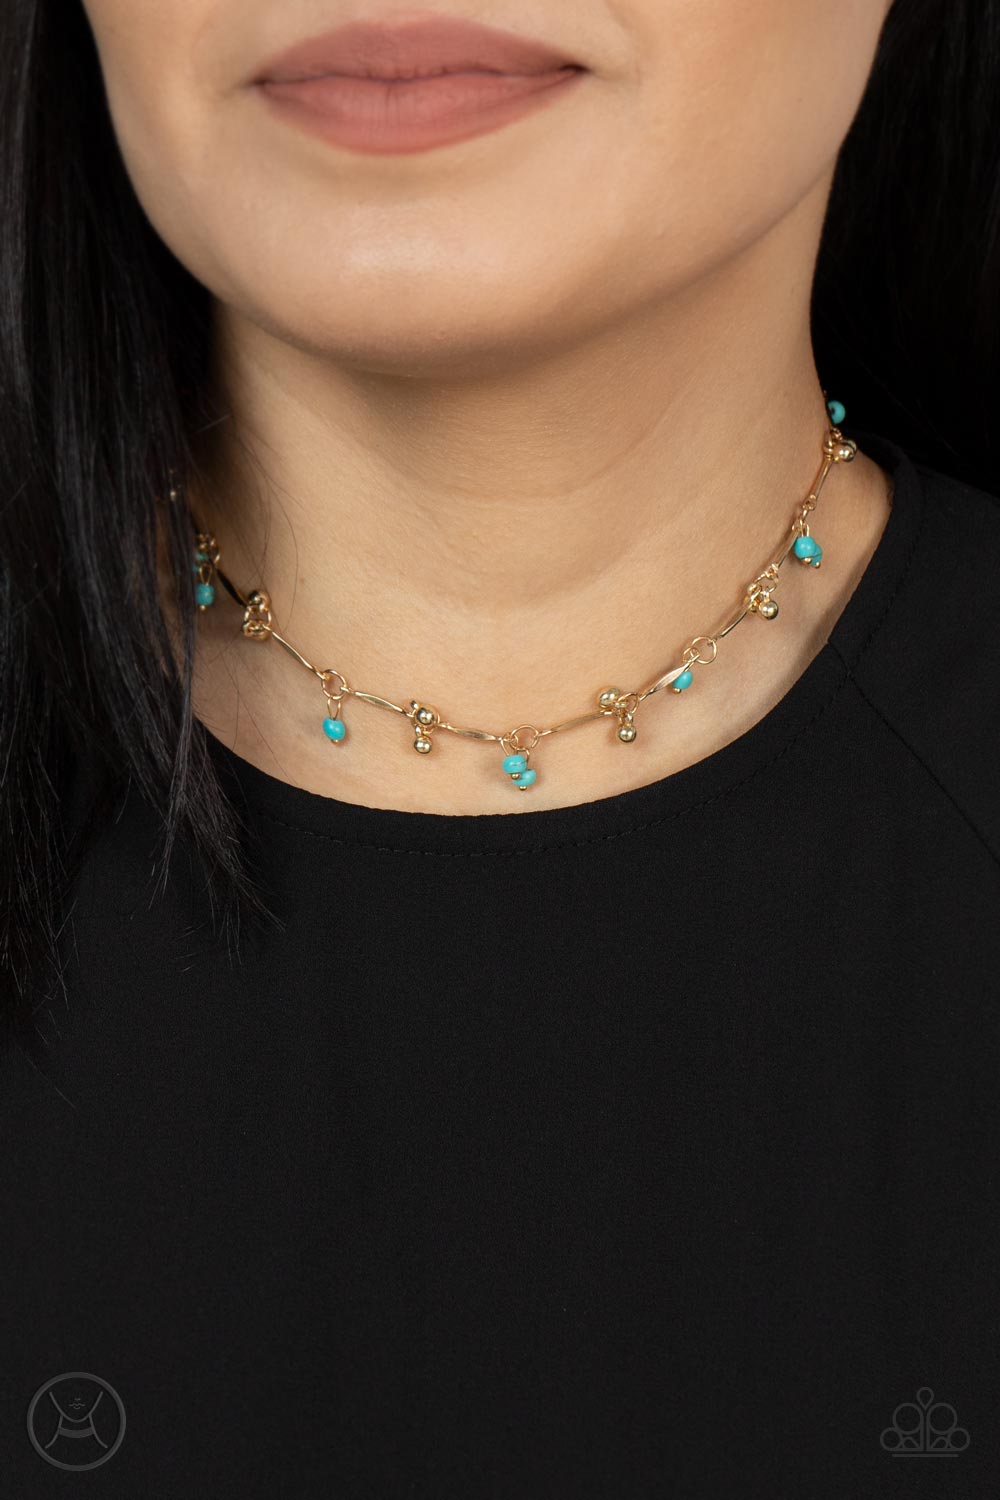 Sahara Social Gold Choker Necklace - Paparazzi Accessories  Pairs of dainty gold beads and turquoise stone beads dangle between faceted gold bars that interconnect around the neck, creating an earthy fringe. Features an adjustable clasp closure.  Sold as one individual choker necklace. Includes one pair of matching earrings.